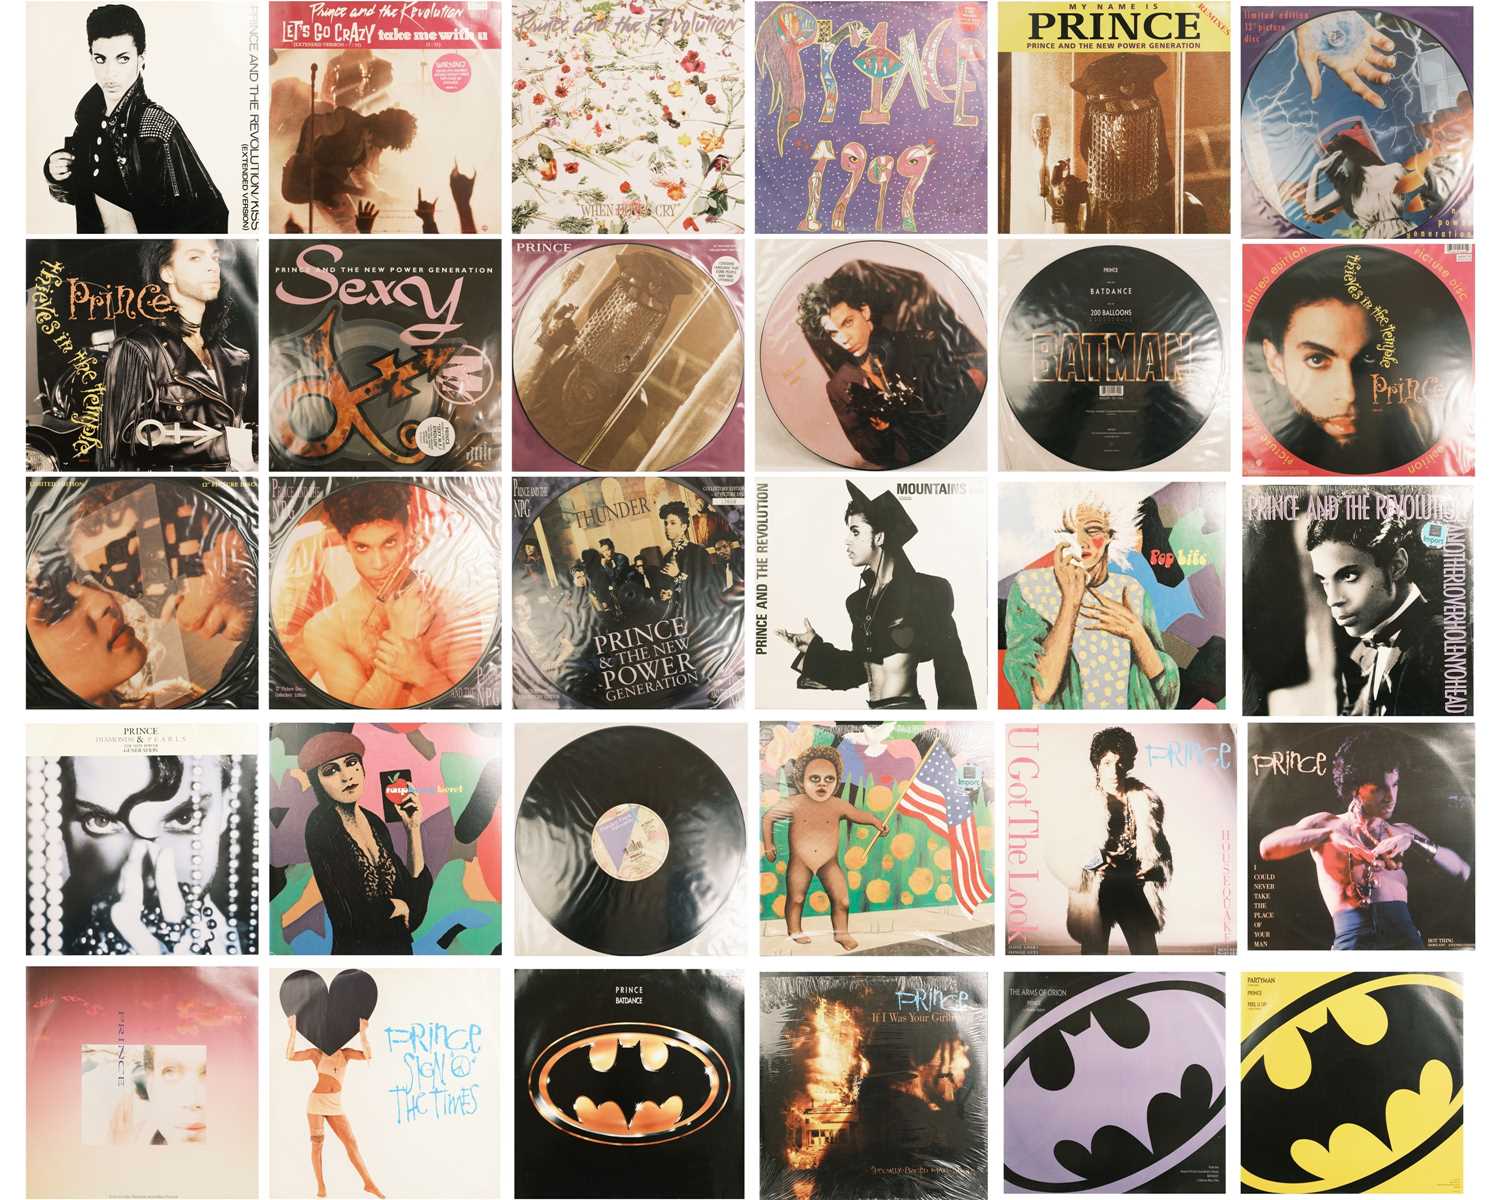 Prince 12" singles and picture discs.